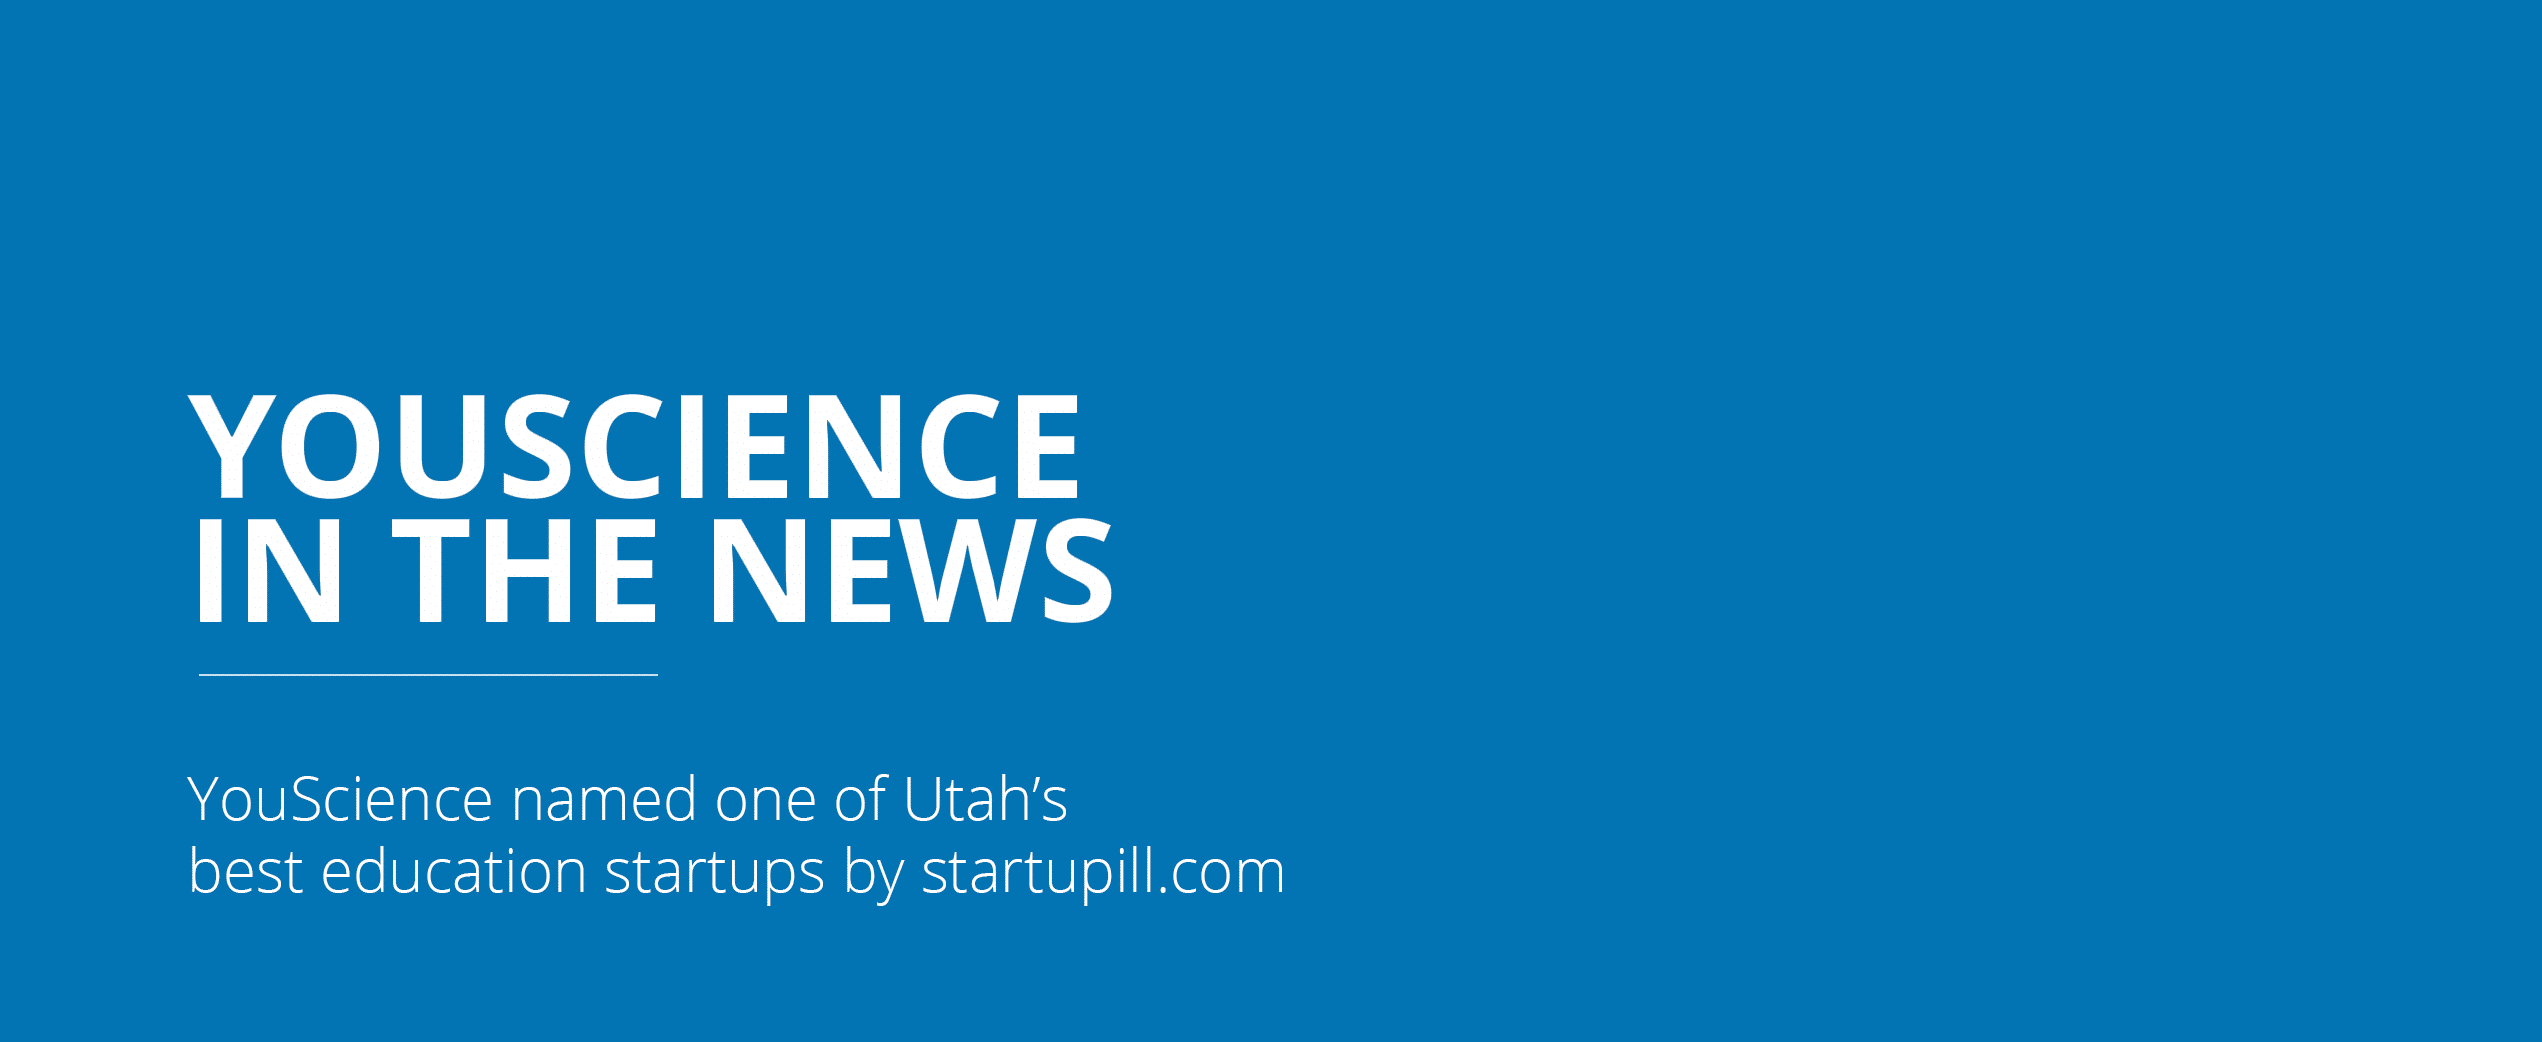 YouScience named one of Utah’s best education startups